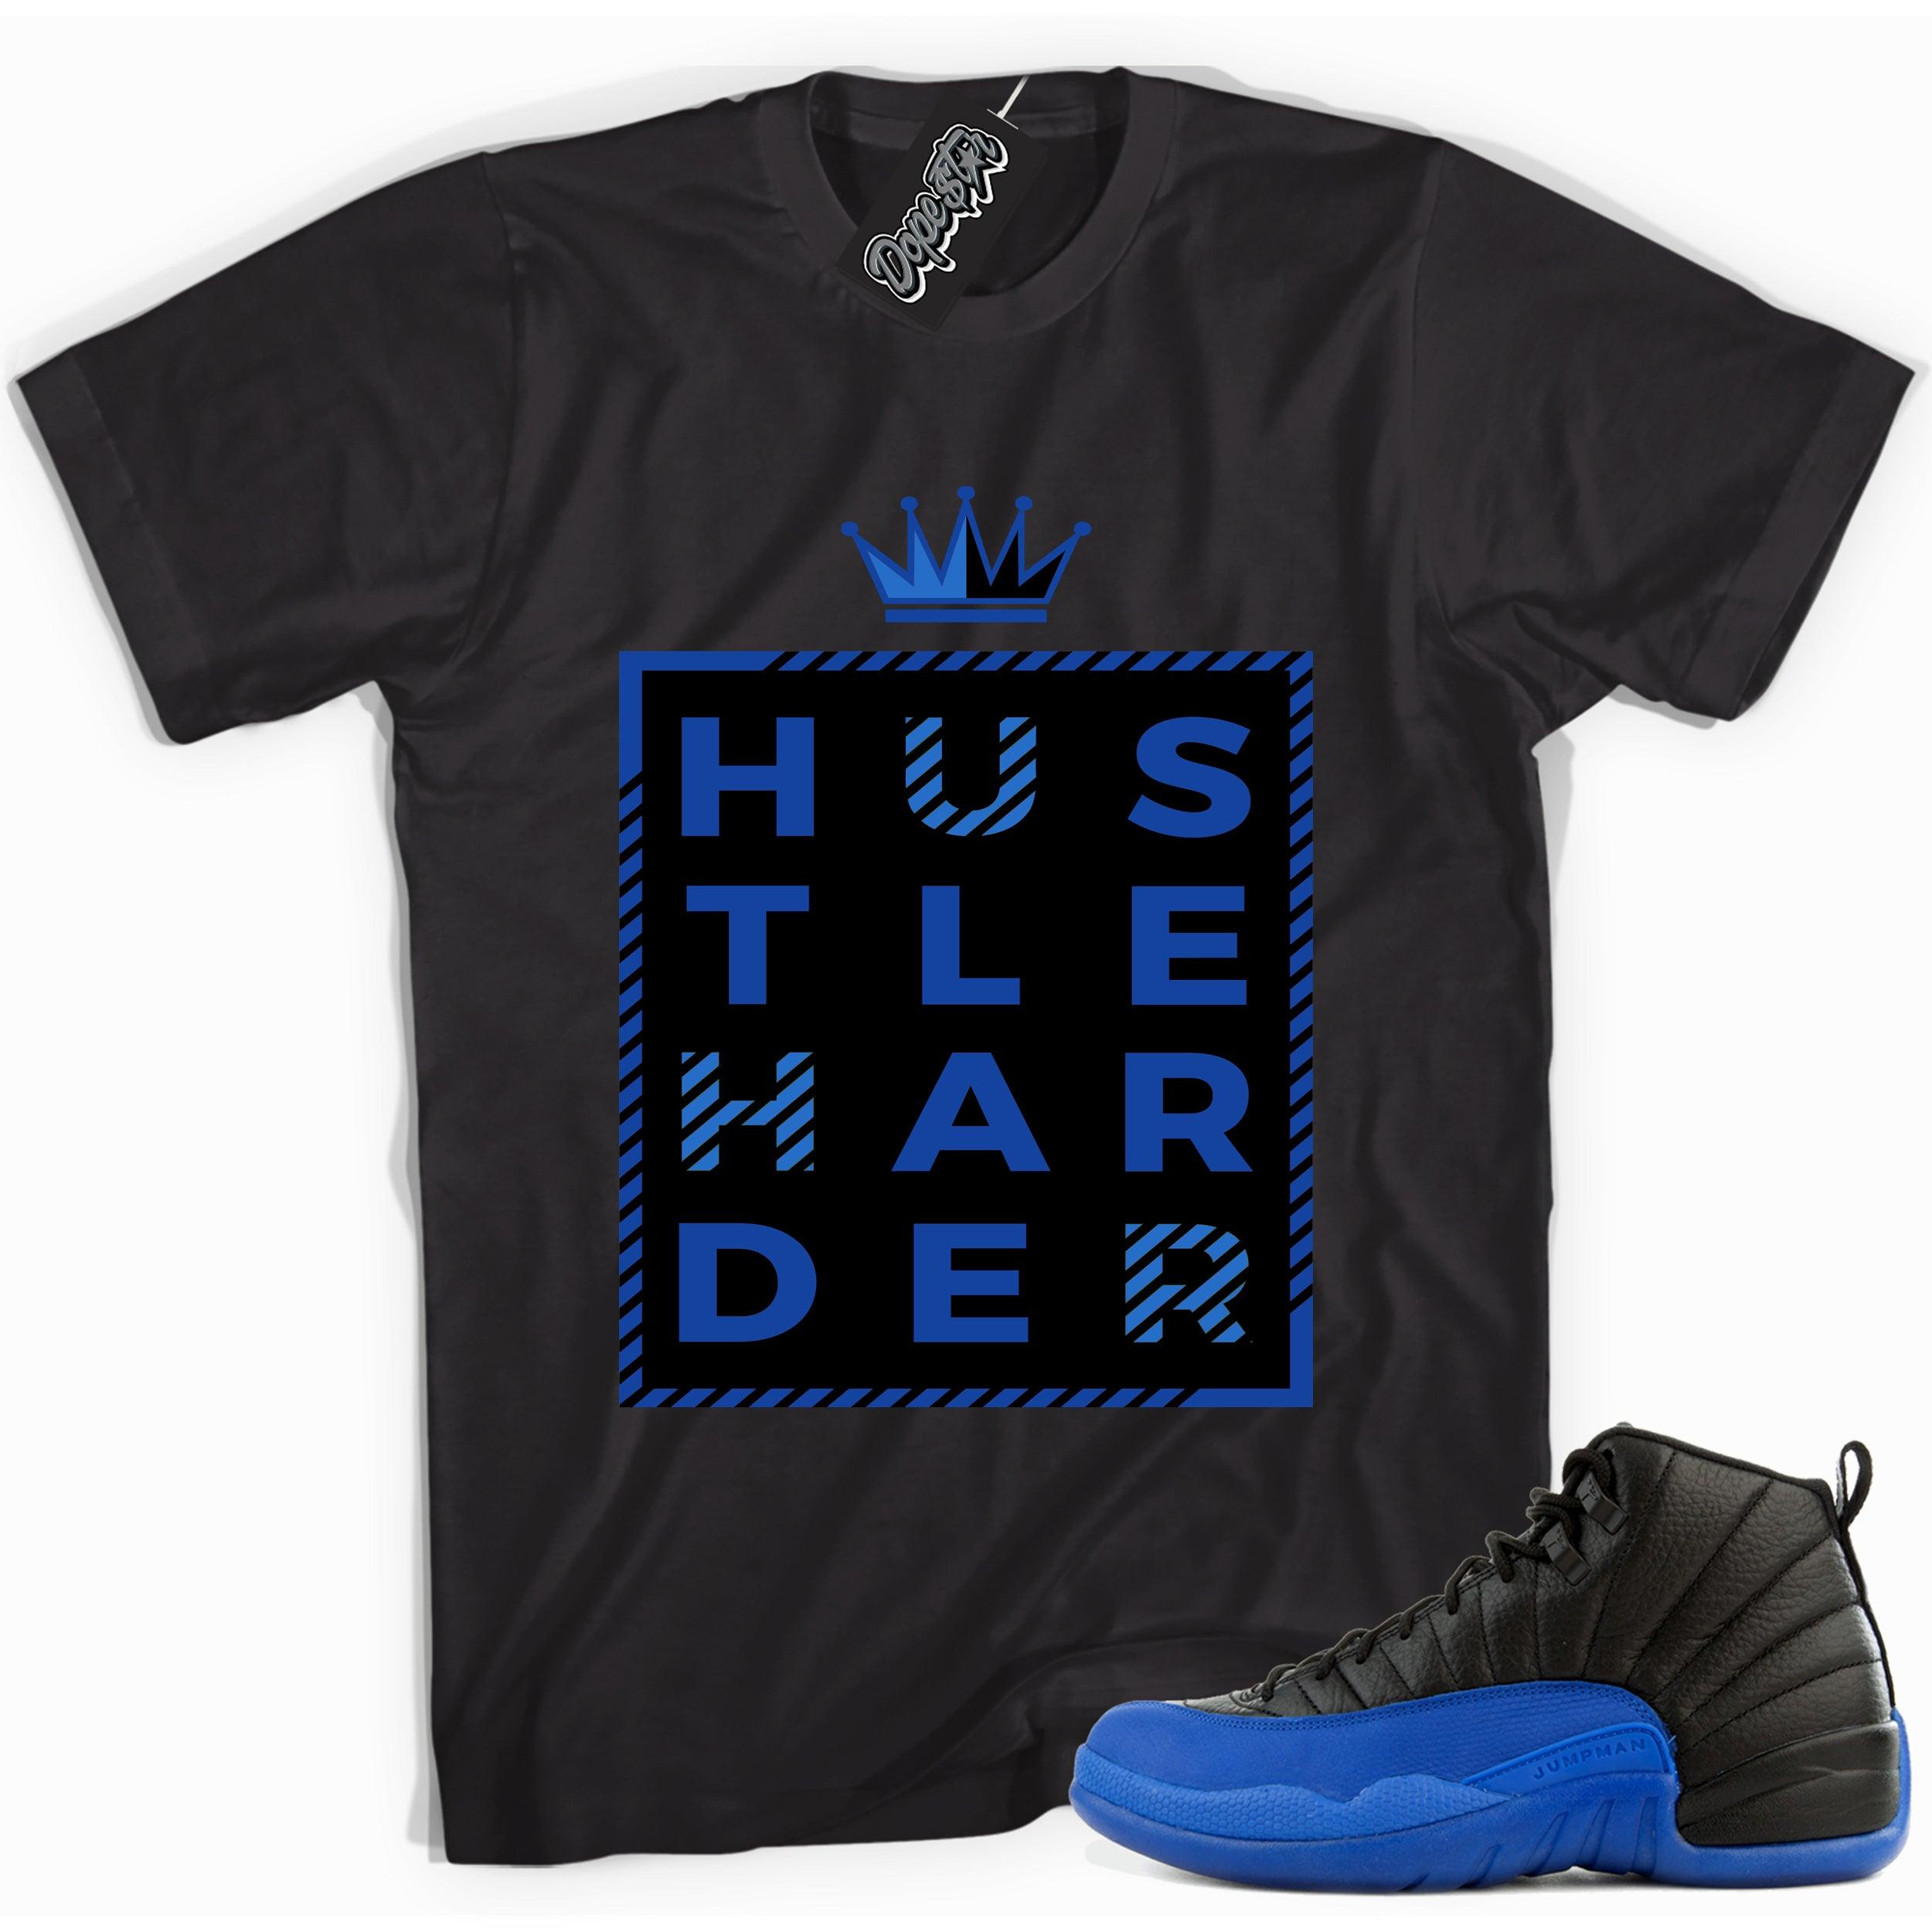 Cool black graphic tee with 'hustle harder' print, that perfectly matches  Air Jordan 12 Retro Black Game Royal sneakers.